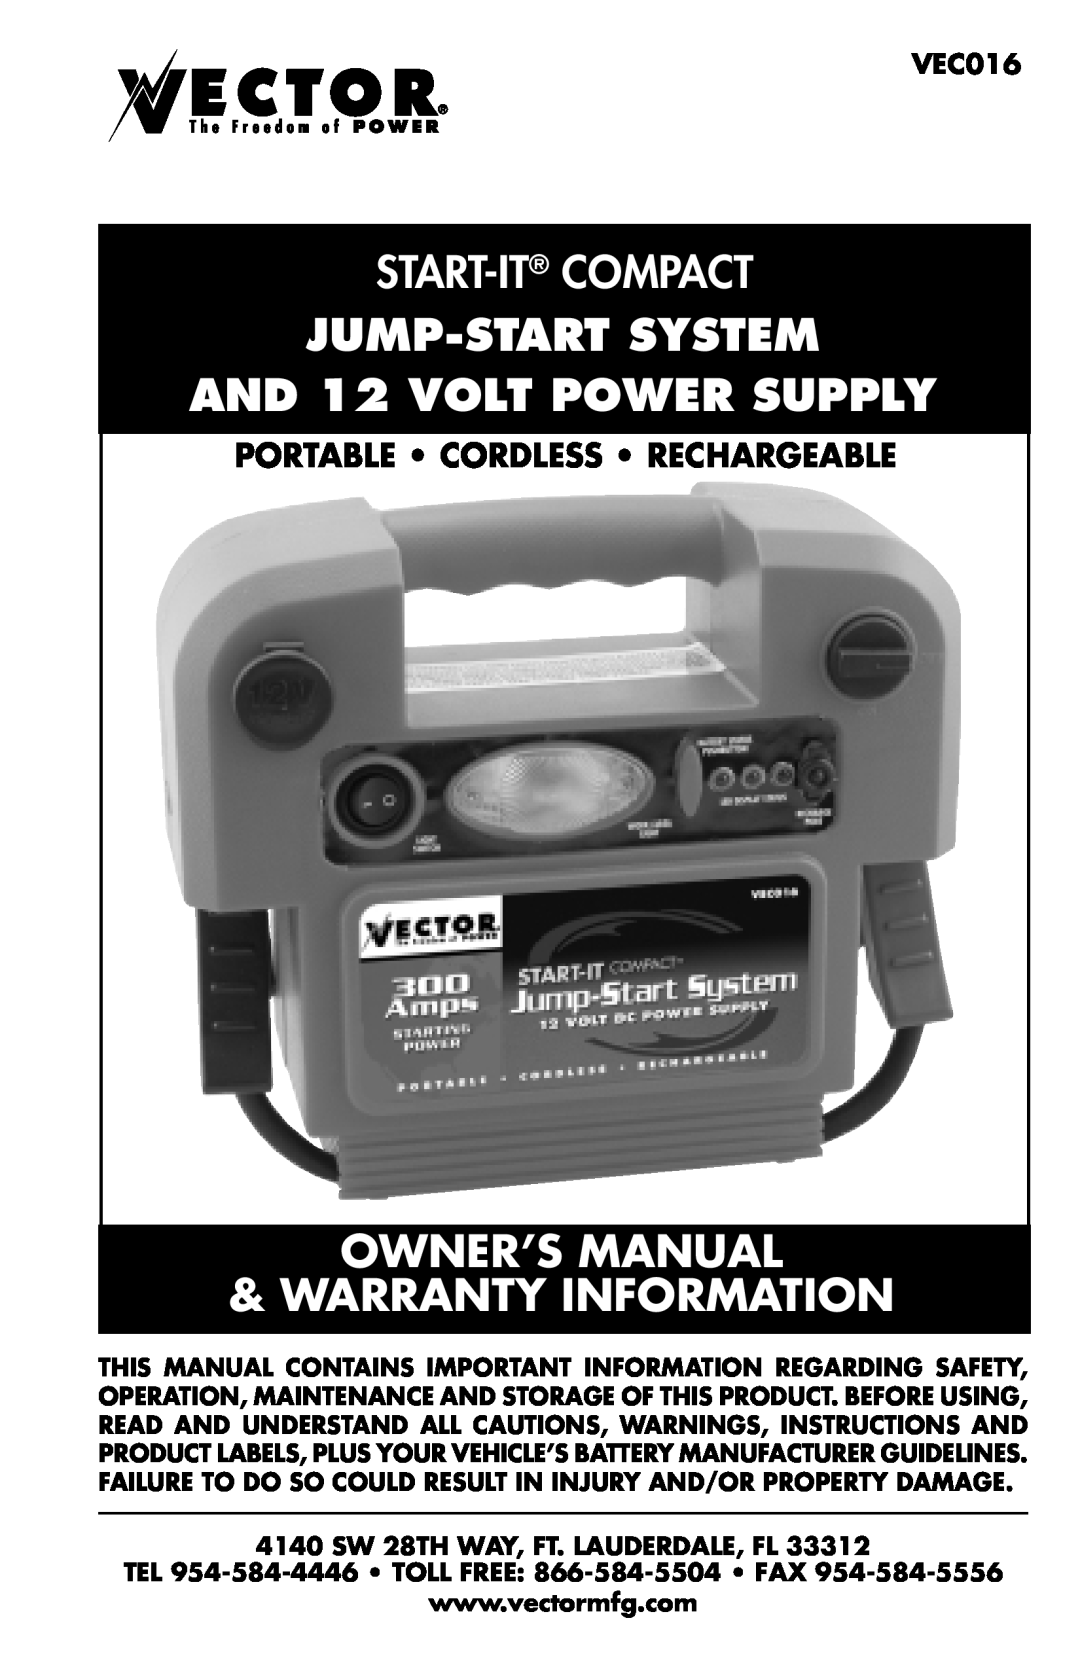 Vector VEC016 owner manual Portable Cordless Rechargeable, 4140 SW 28TH WAY, FT. LAUDERDALE, FL, Start-It Compact 